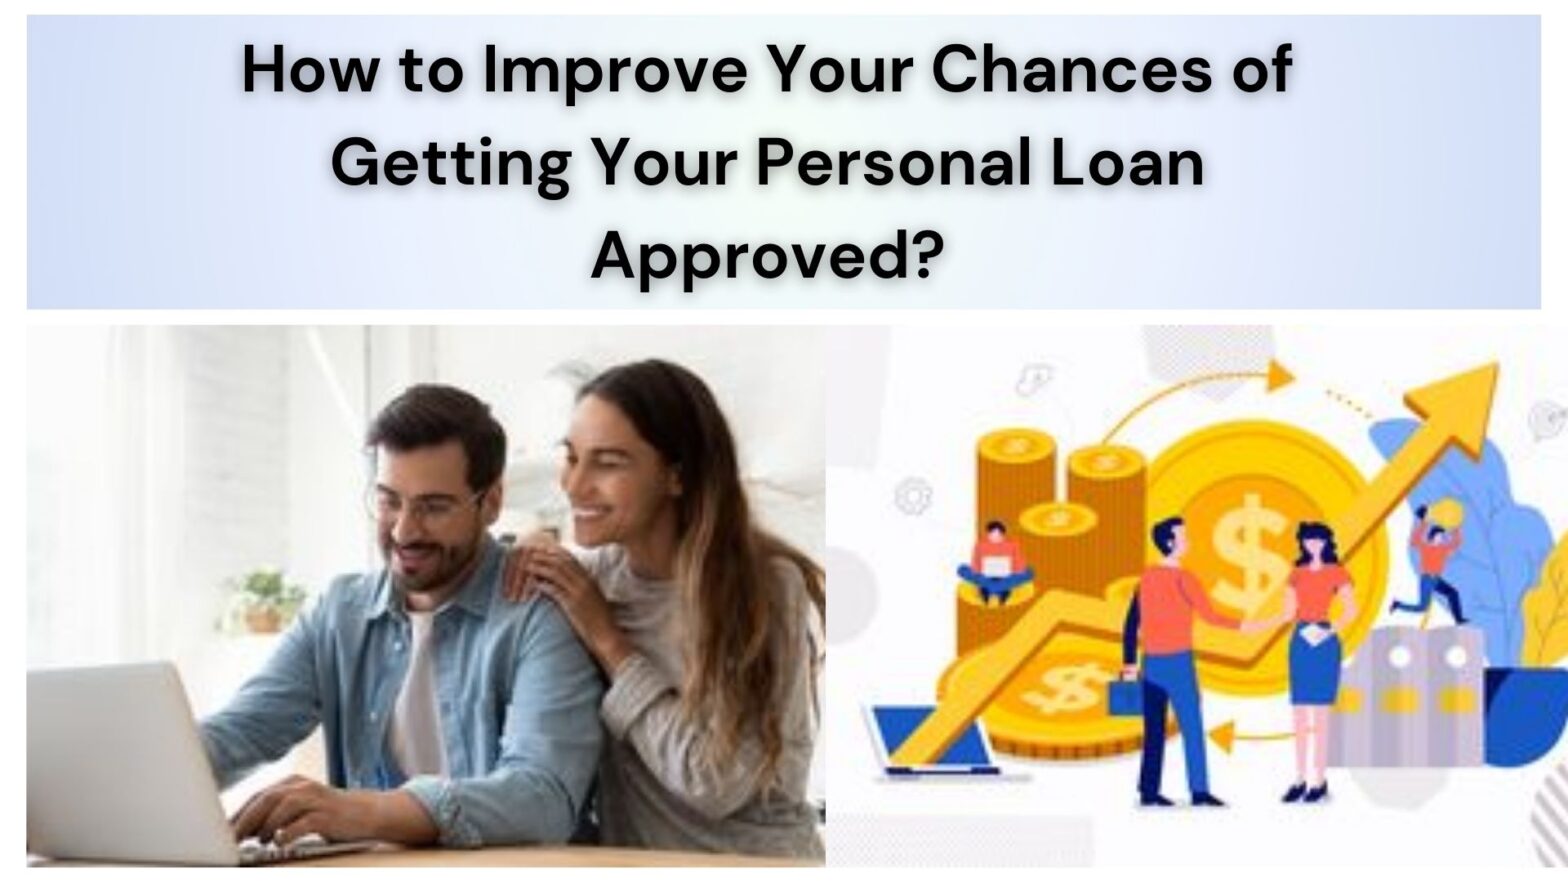 Getting Your Personal Loan Approved